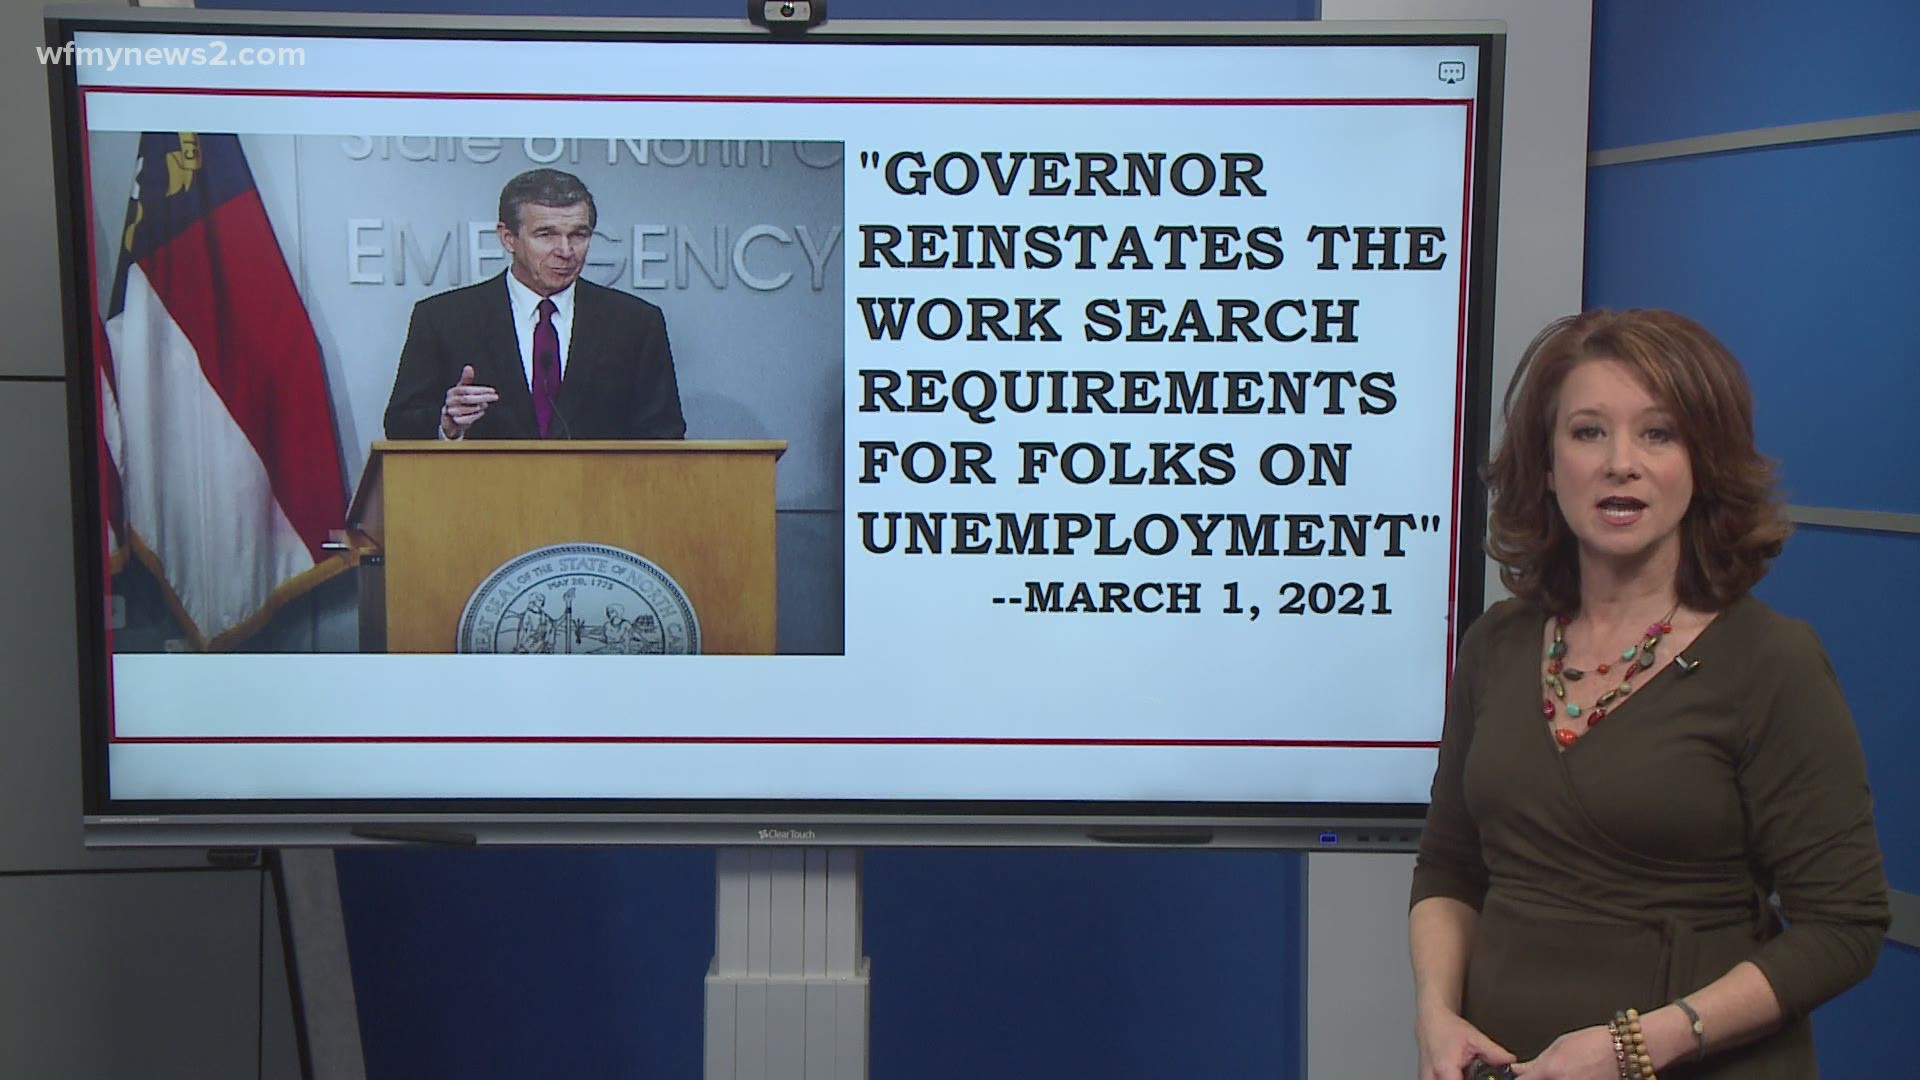 Gov. Roy Cooper reinstates the work search requirements for people on unemployment.